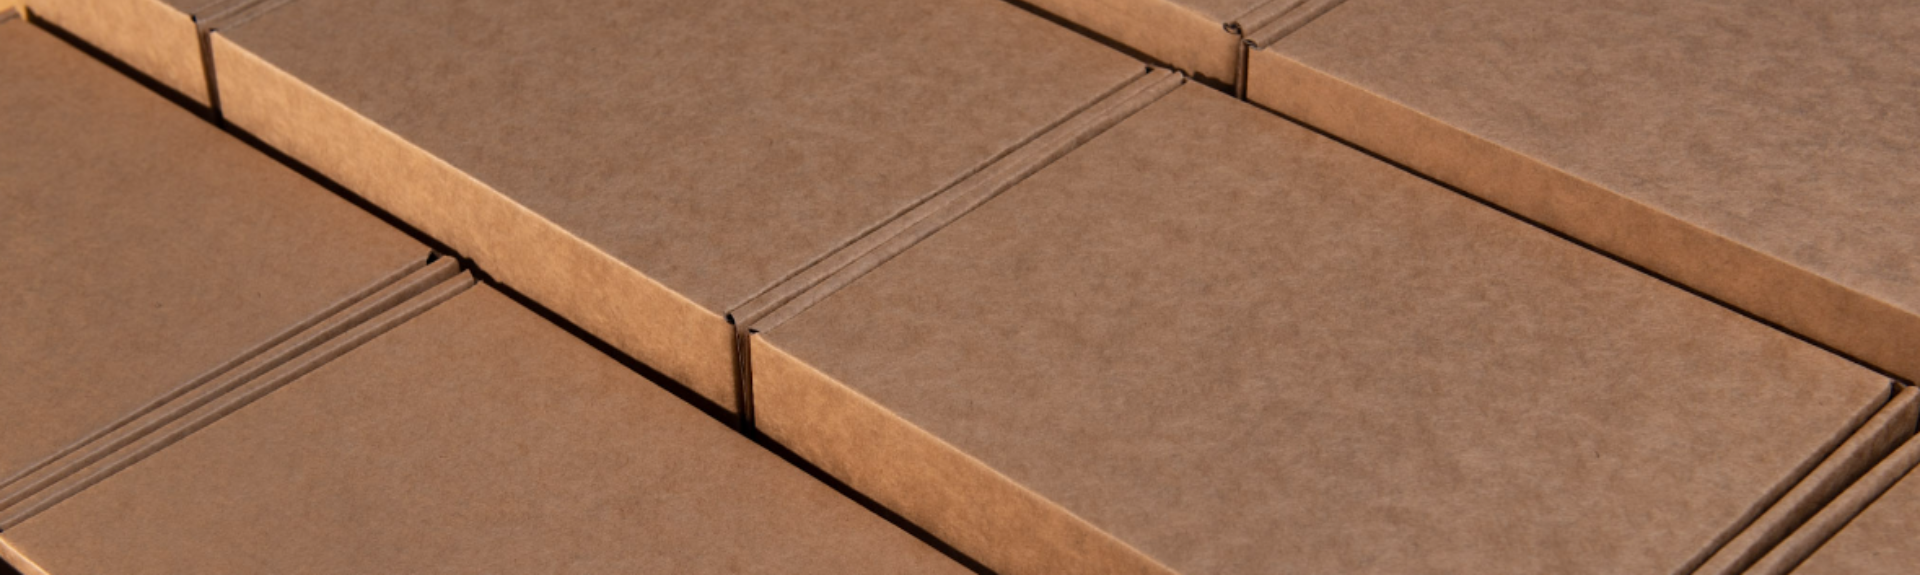 Sustainable Packaging Solutions in Melbourne